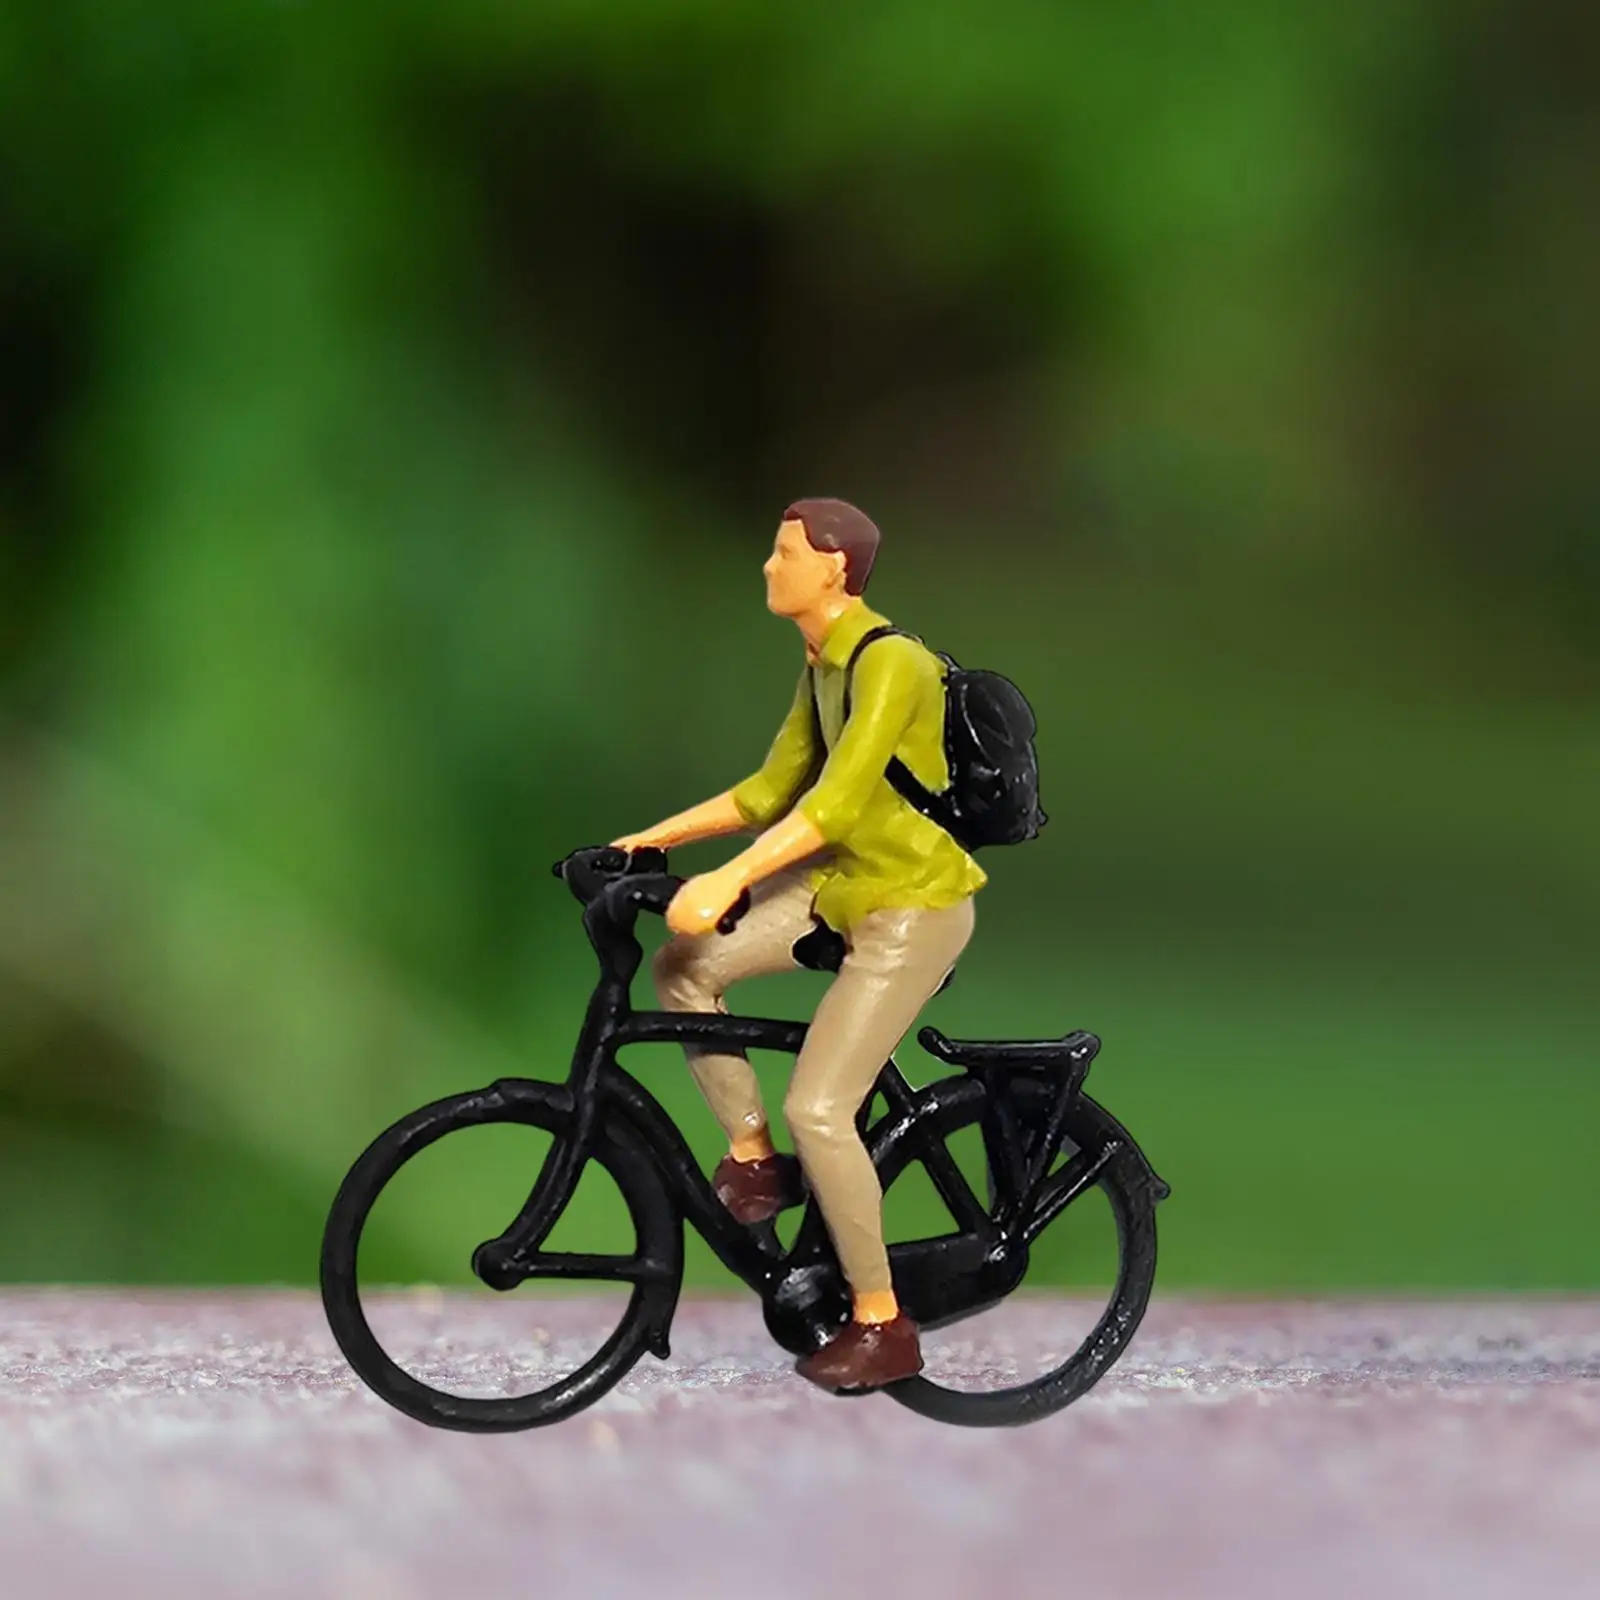 Resin 1/87 Scale Cyclist Figures Tiny People for DIY Scene Layout Decor